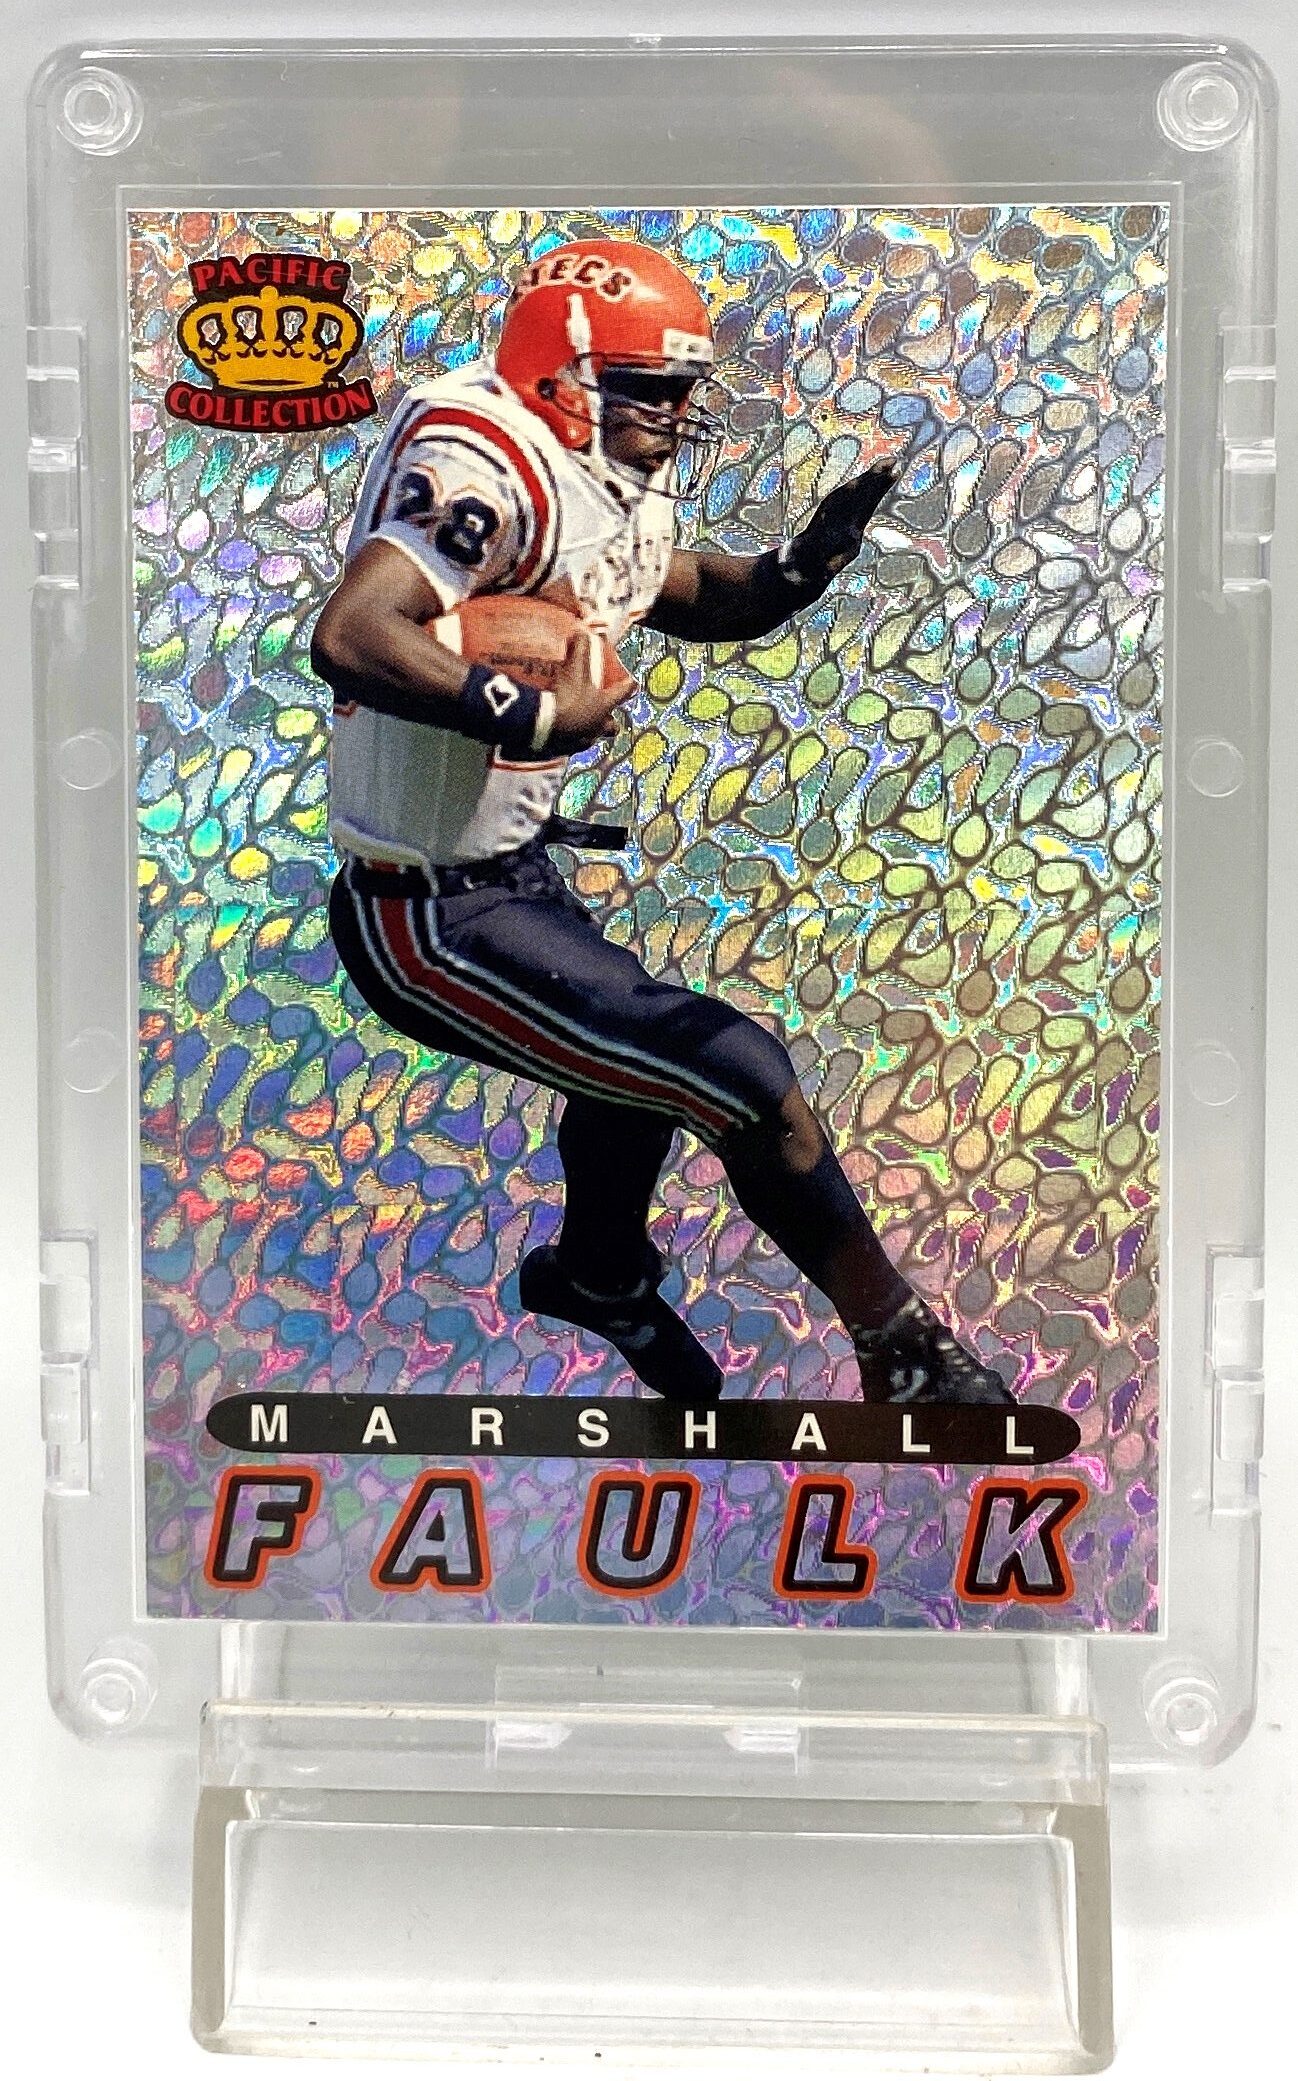 1994 Pacific Collection Marshall Faulk Card #39 (1)